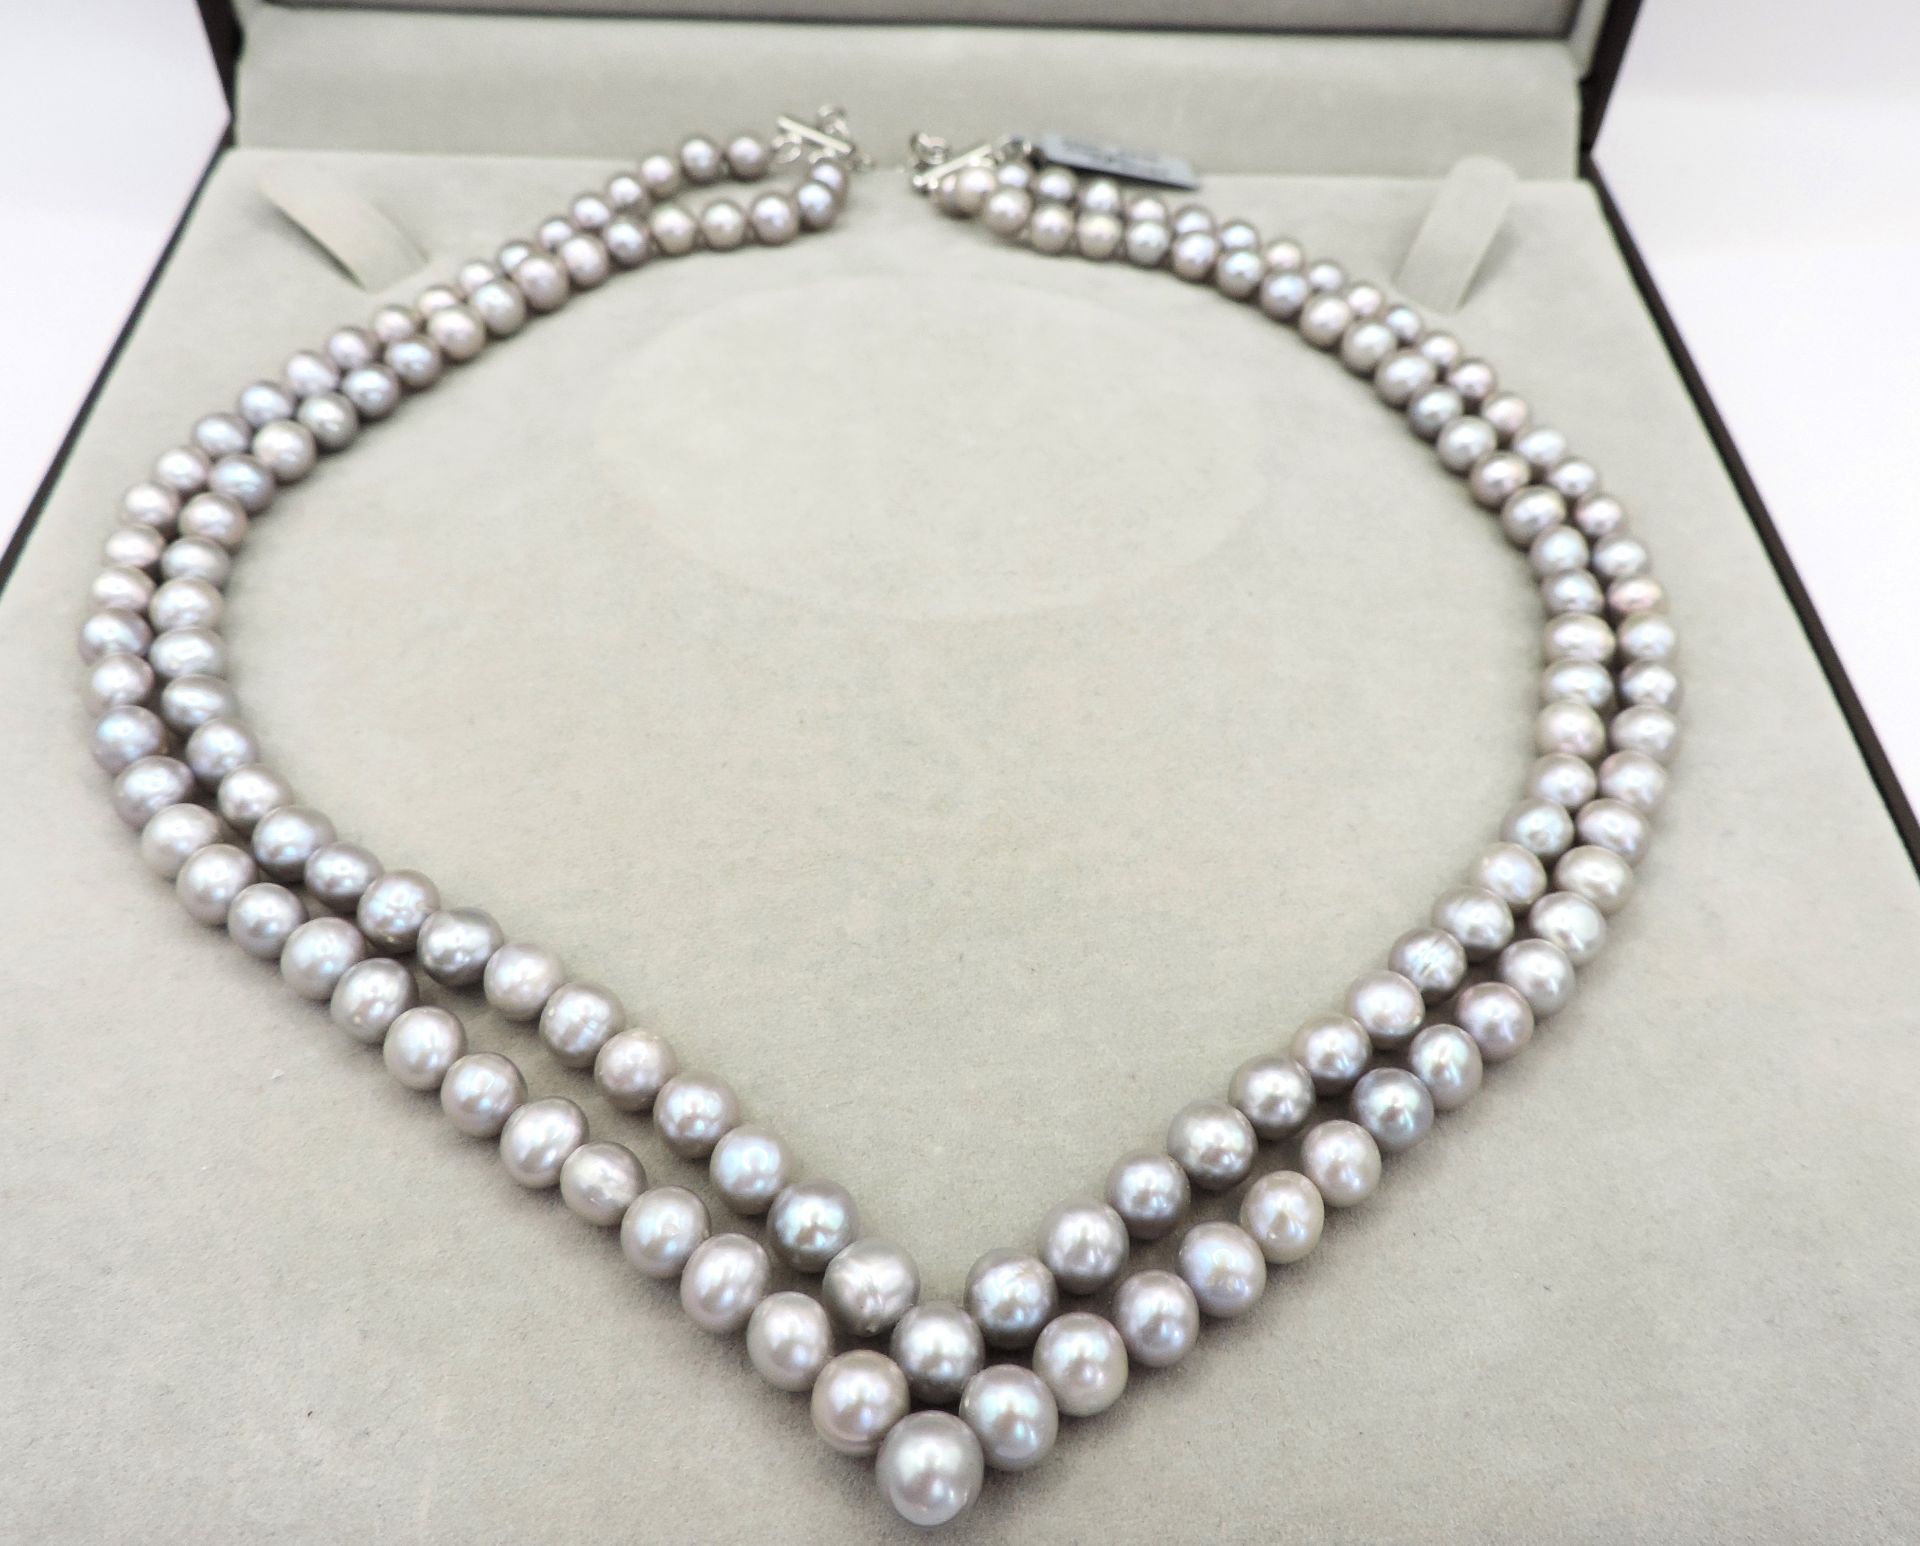 Cultured Pearl Necklace Silver Clasp New with Gift Box RRP £235 - Image 5 of 5